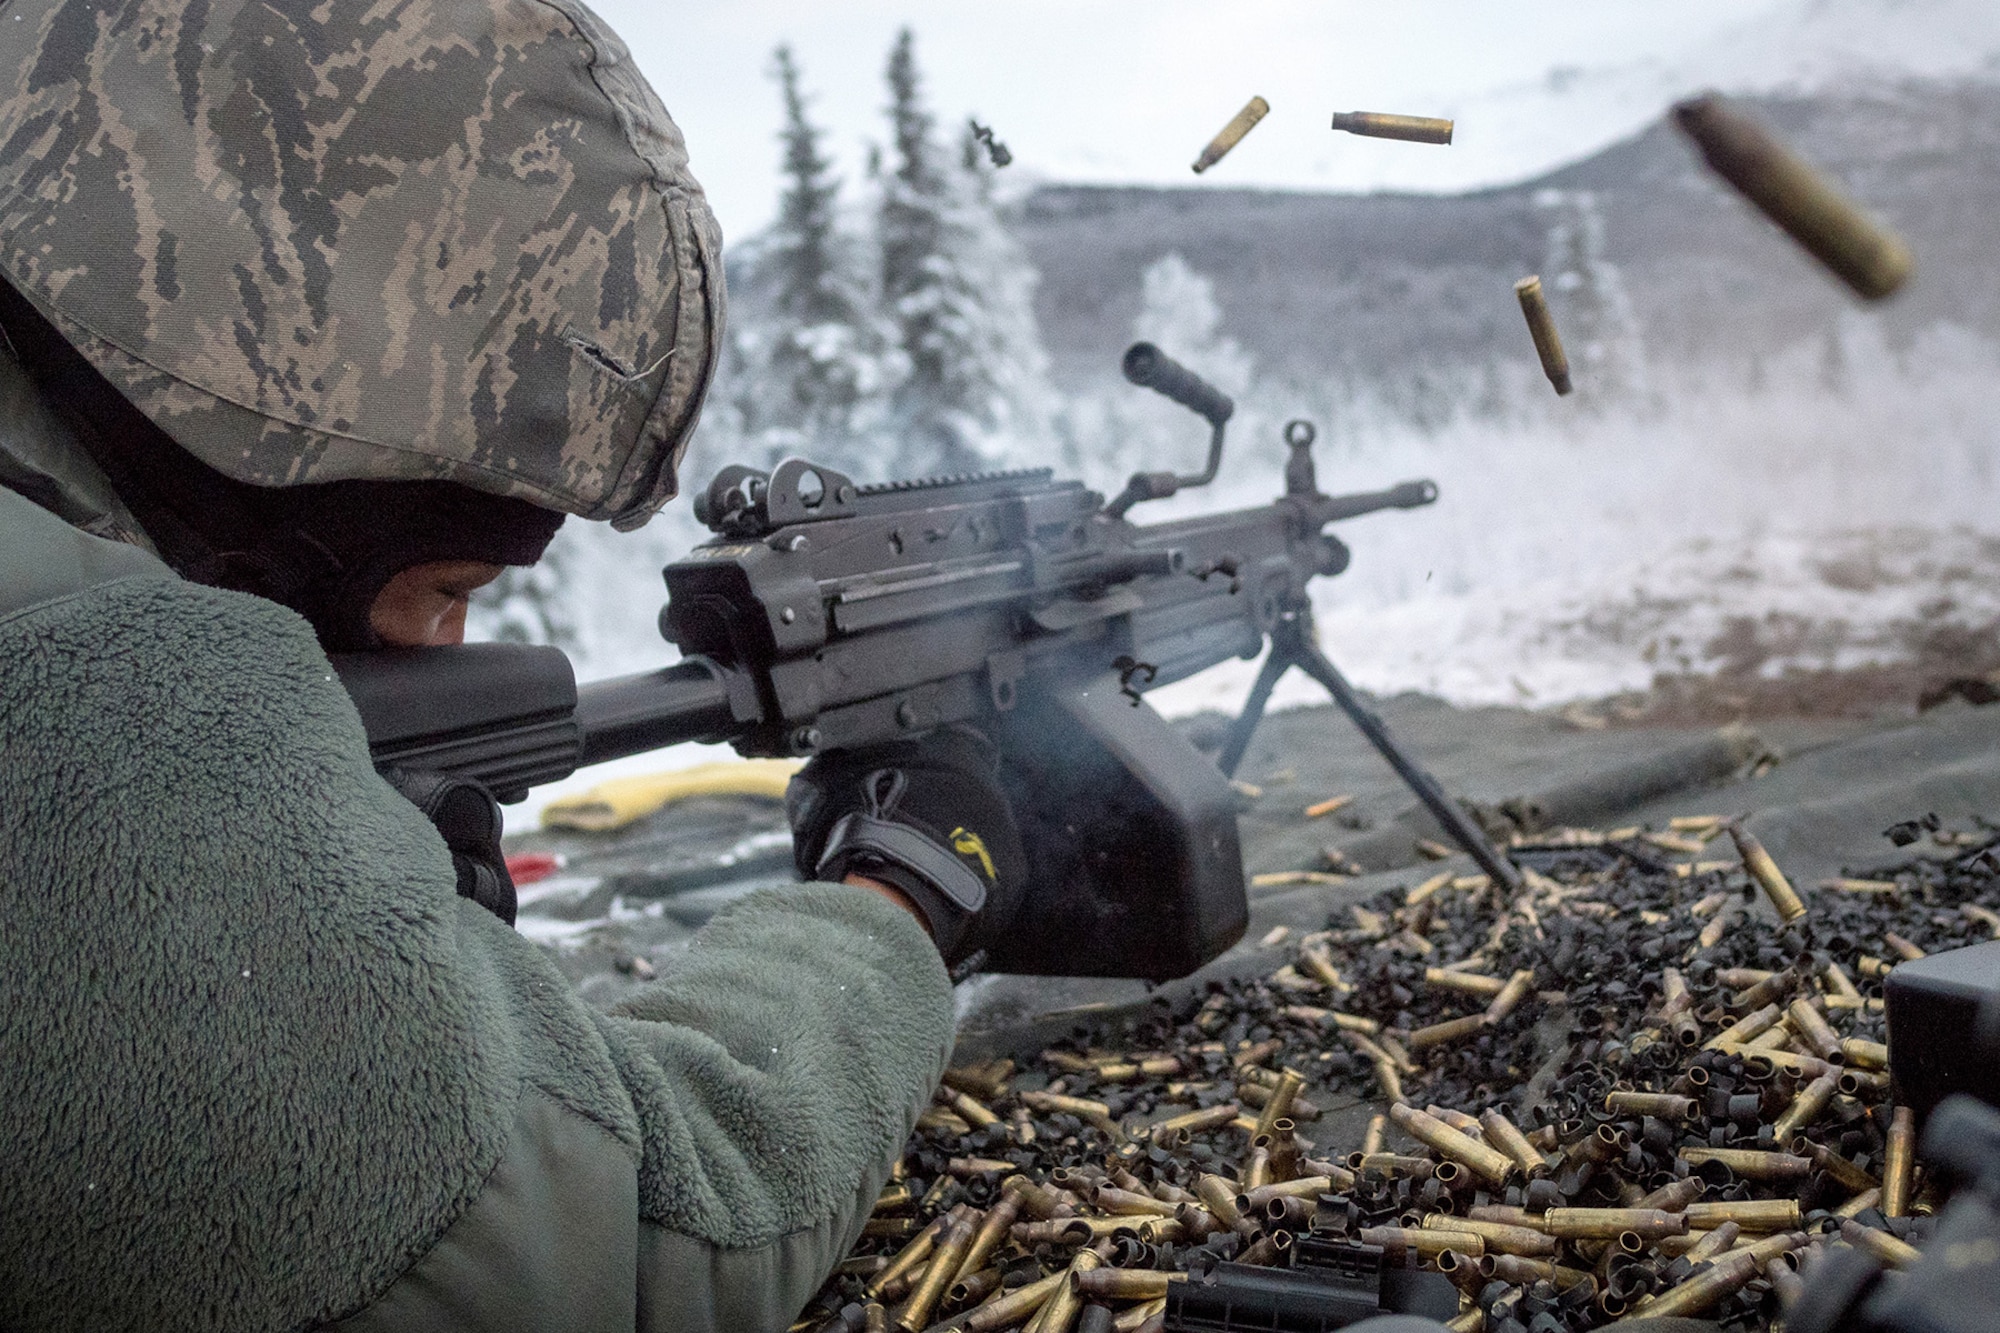 Airman 1st Class Kaylon Thomas, a native of Conway, Ark., assigned to the 673d Security Forces Squadron, fires an M249 Squad Automatic Weapon, as Airmen conduct a machine gun qualification range on Joint Base Elmendorf-Richardson, Alaska, Jan. 10, 2018. Security Forces Airmen perform extensive training in law enforcement as well as combat tactics to protect U.S. Military bases and assets both stateside and overseas.